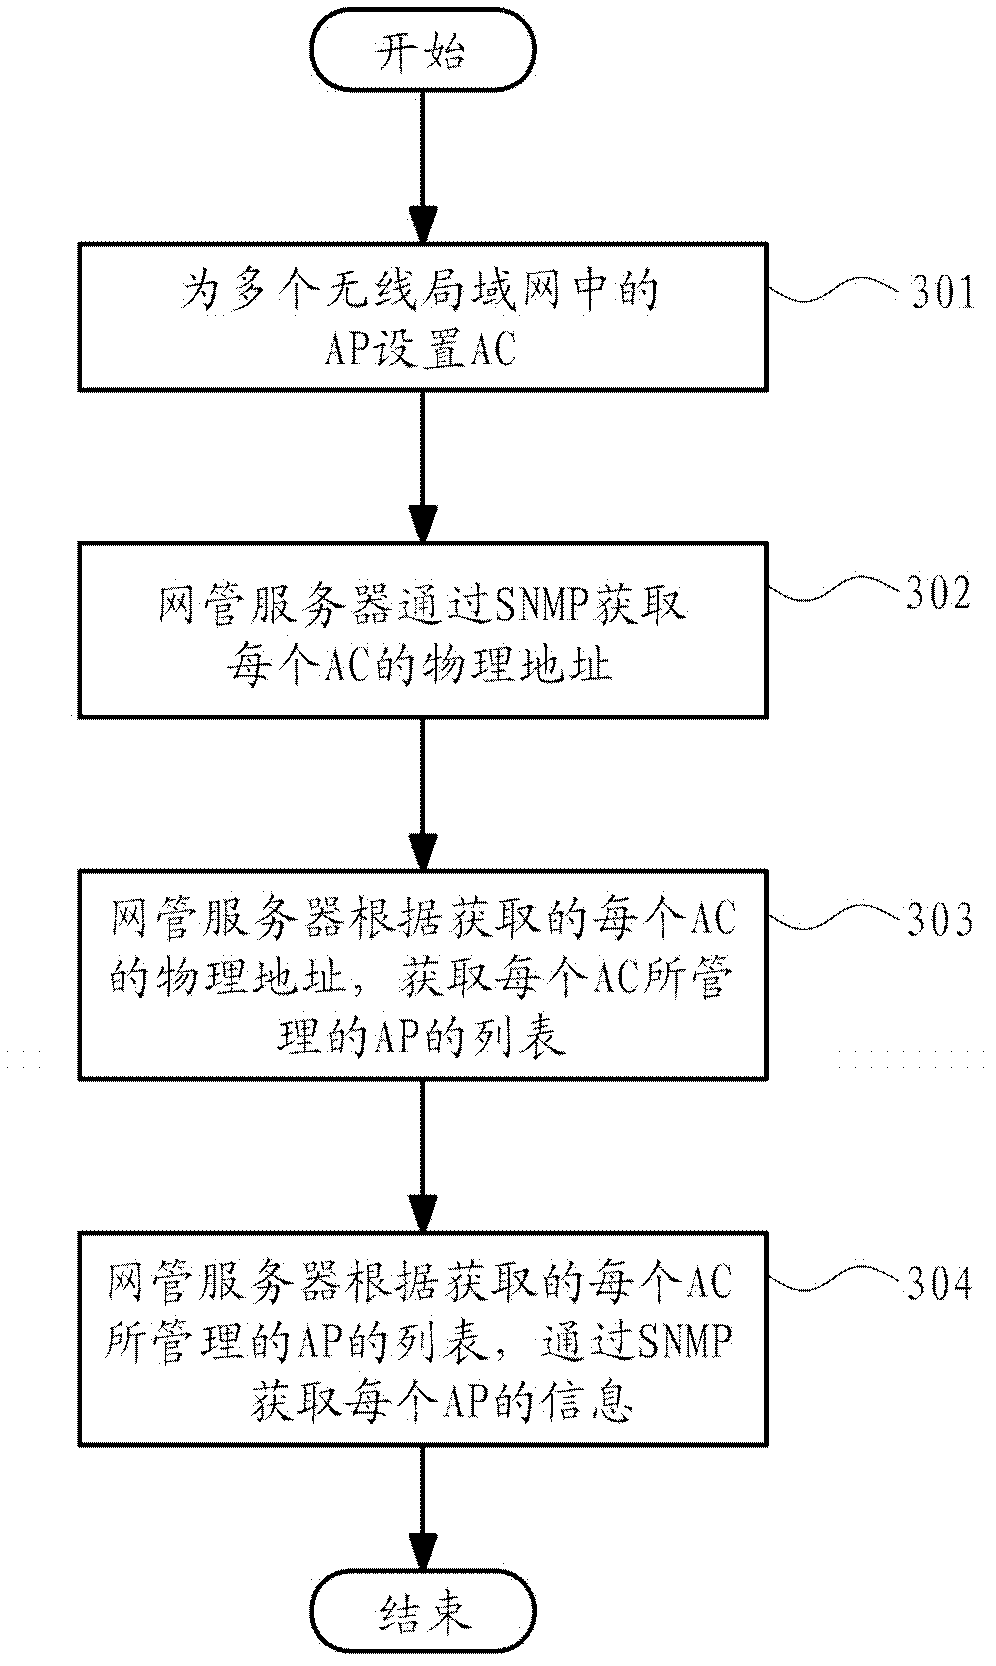 Integrated access point topology management method